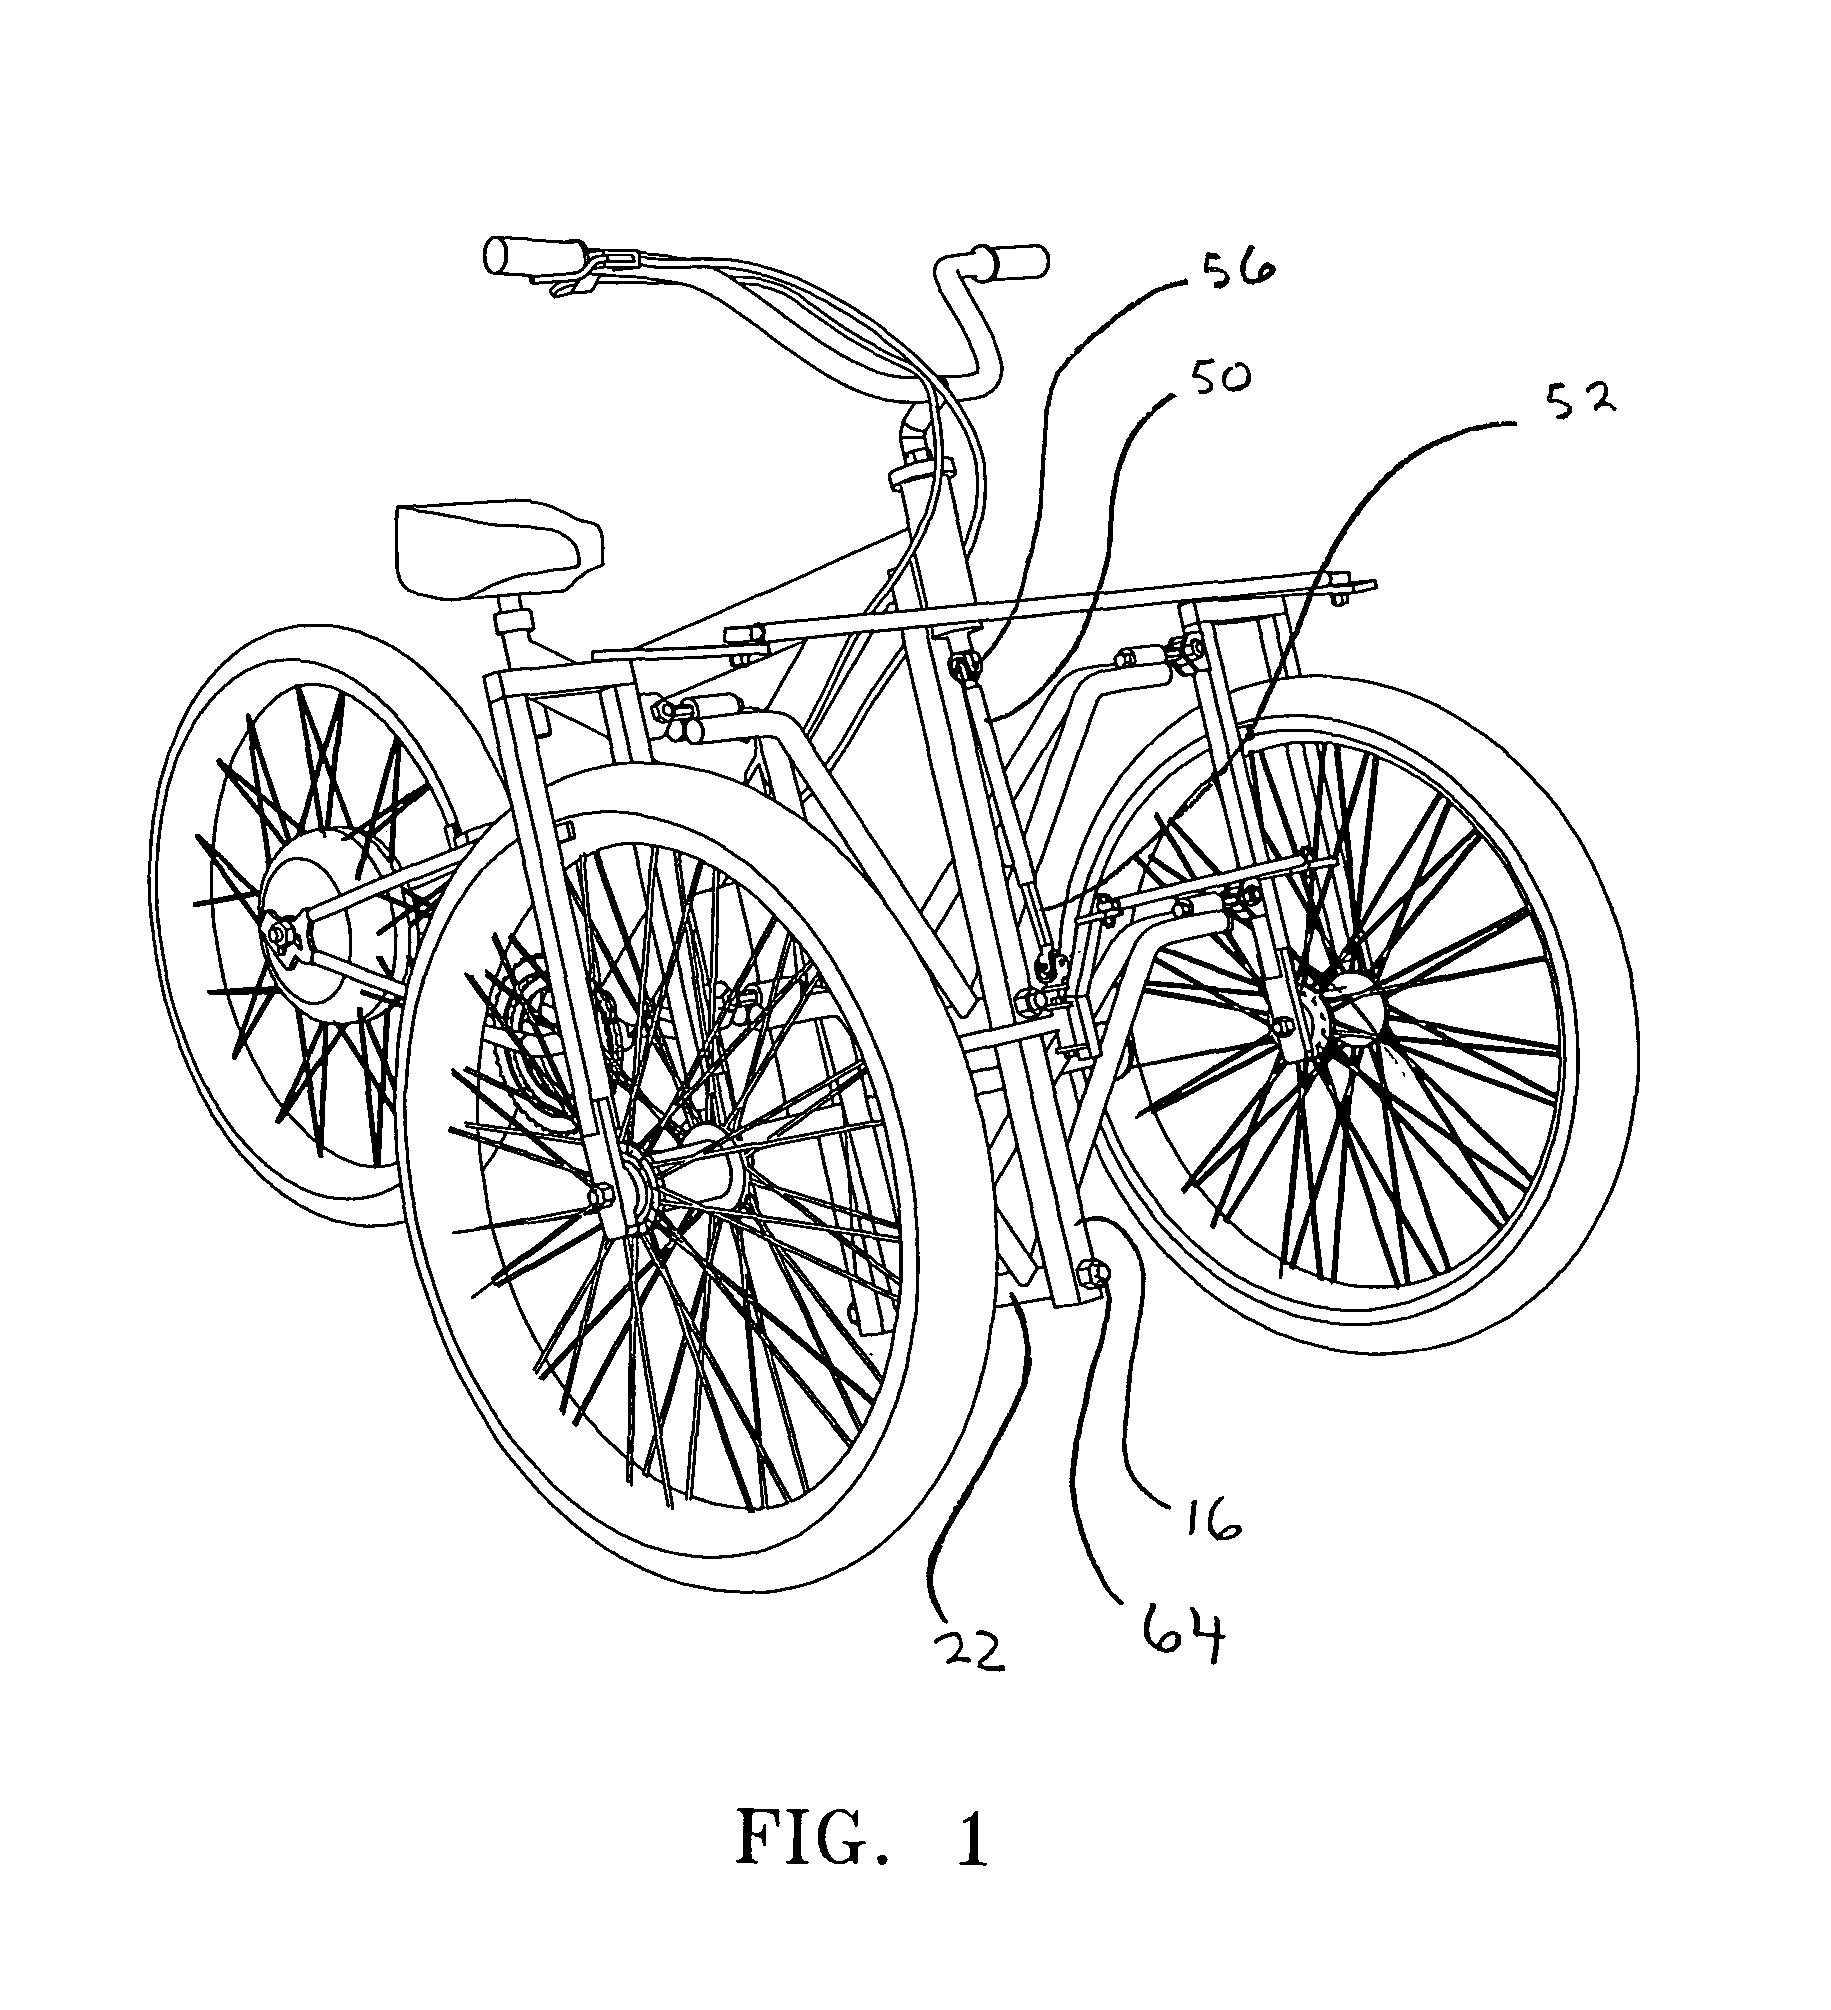 Vehicle with improved steering system